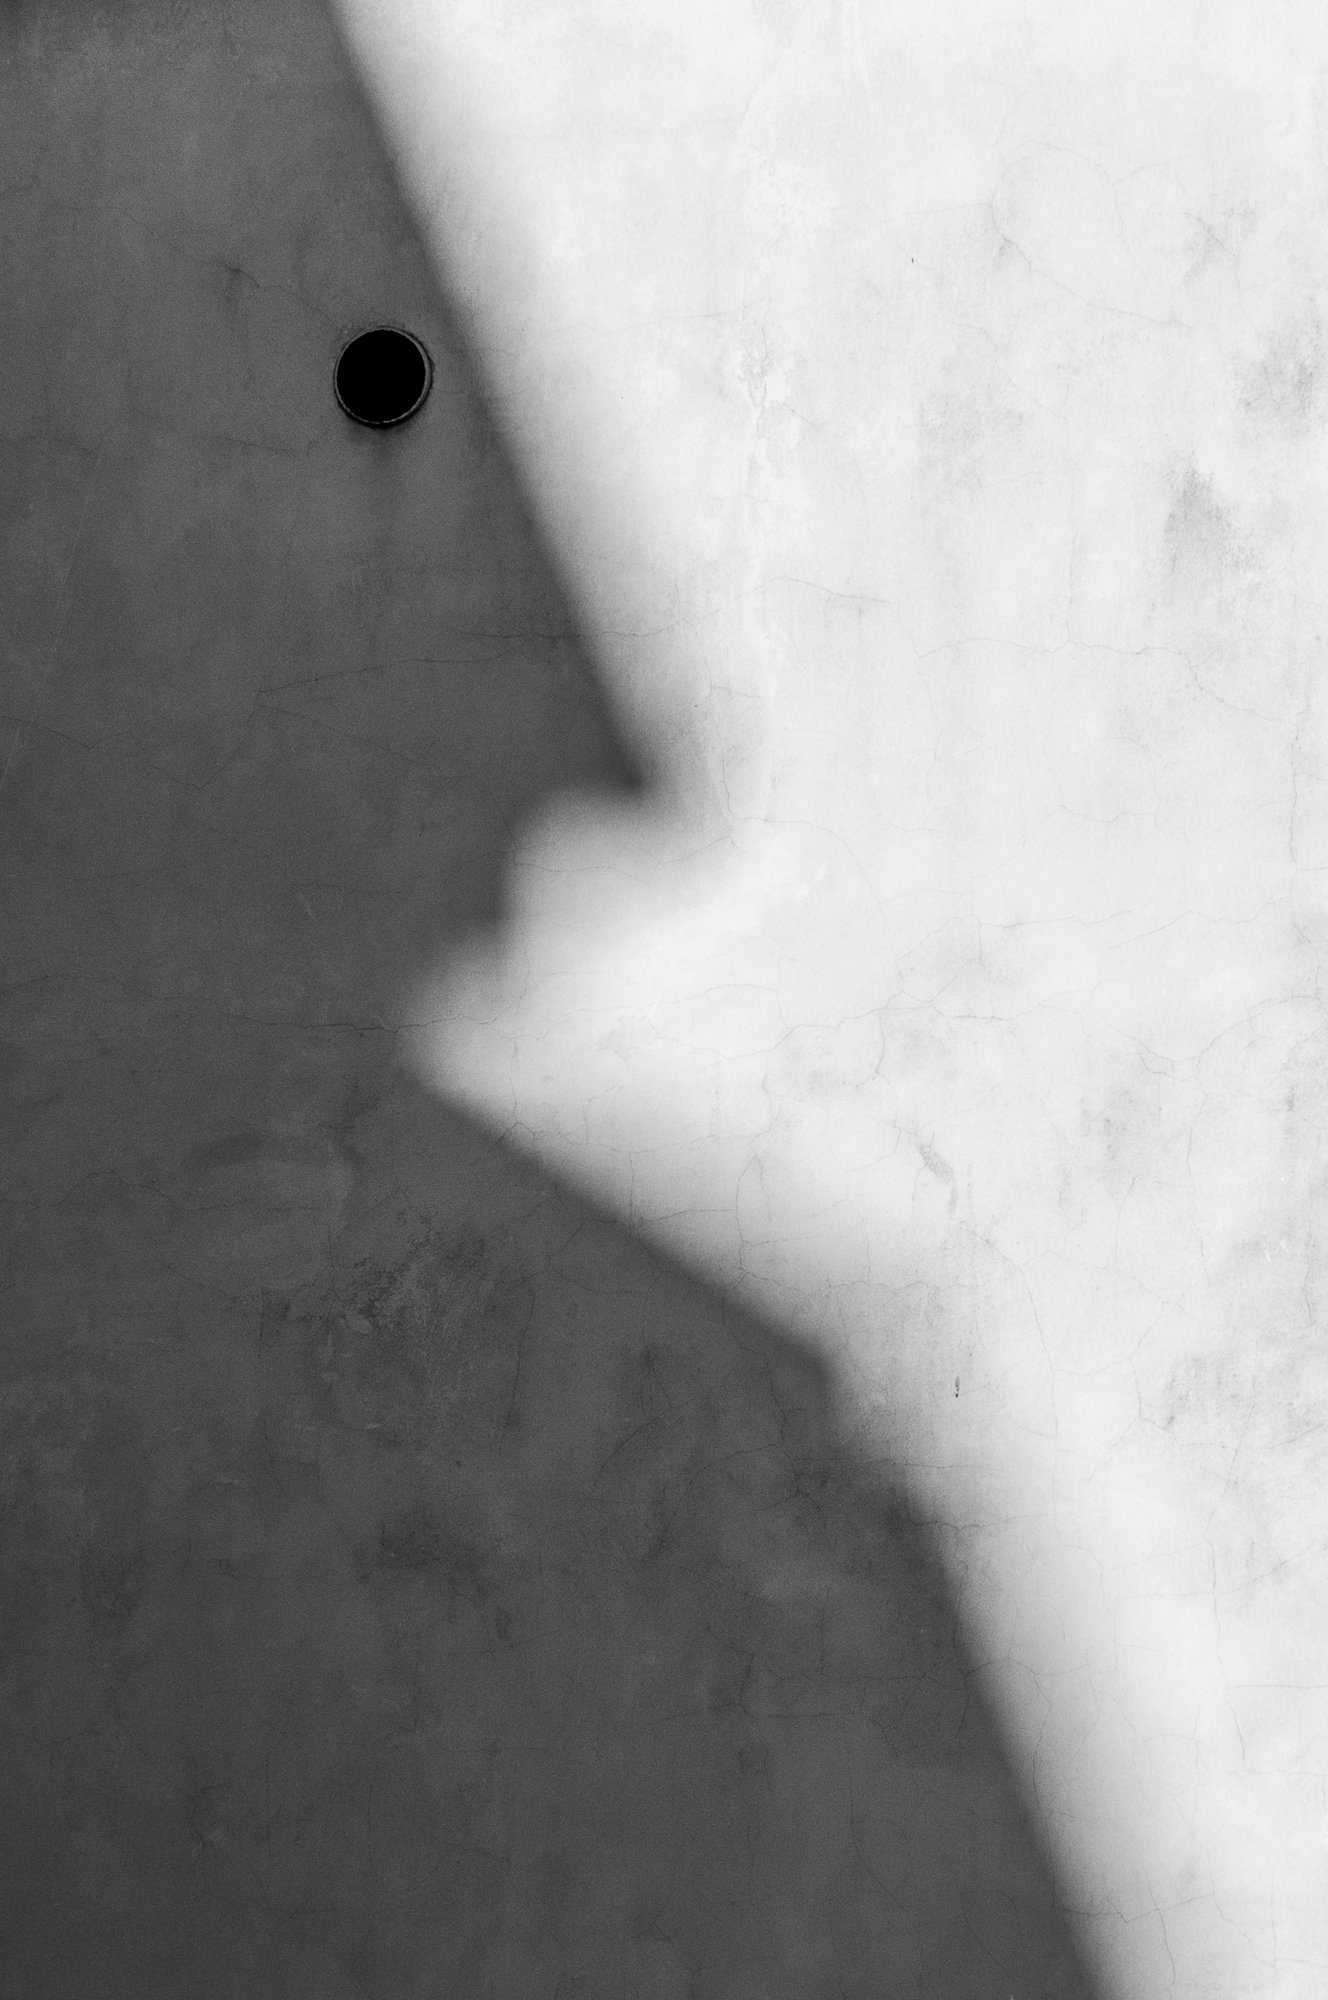 Adam Mazek Photography Warsaw 2018. Minimalism. The Third Eye. Geometry. Abstraction. Profile. Inspired by Dali. Portfolio: "Abstraction, part VI"